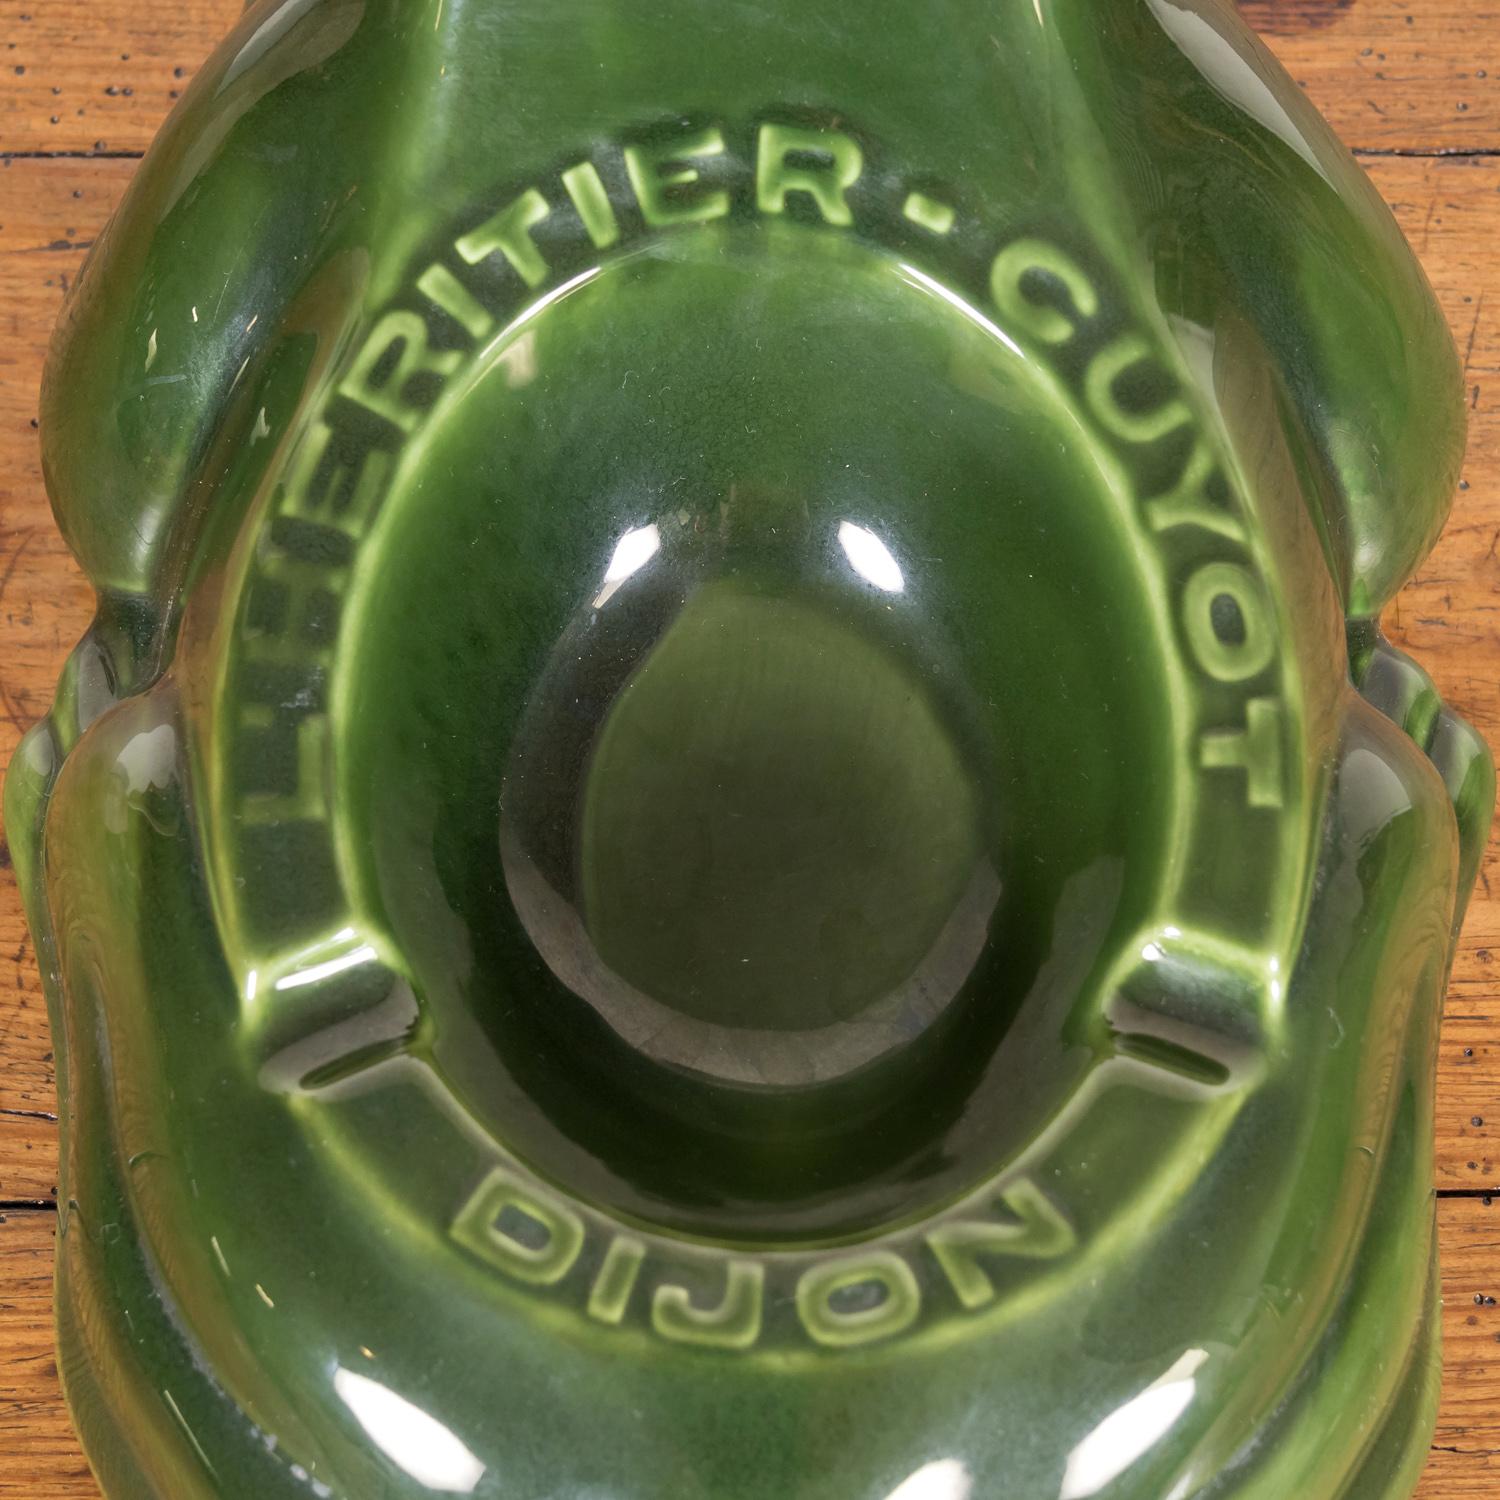 Large Vintage French L'HERITIER GUYOT DIJON Green Ceramic Frog Ad Ashtray 7